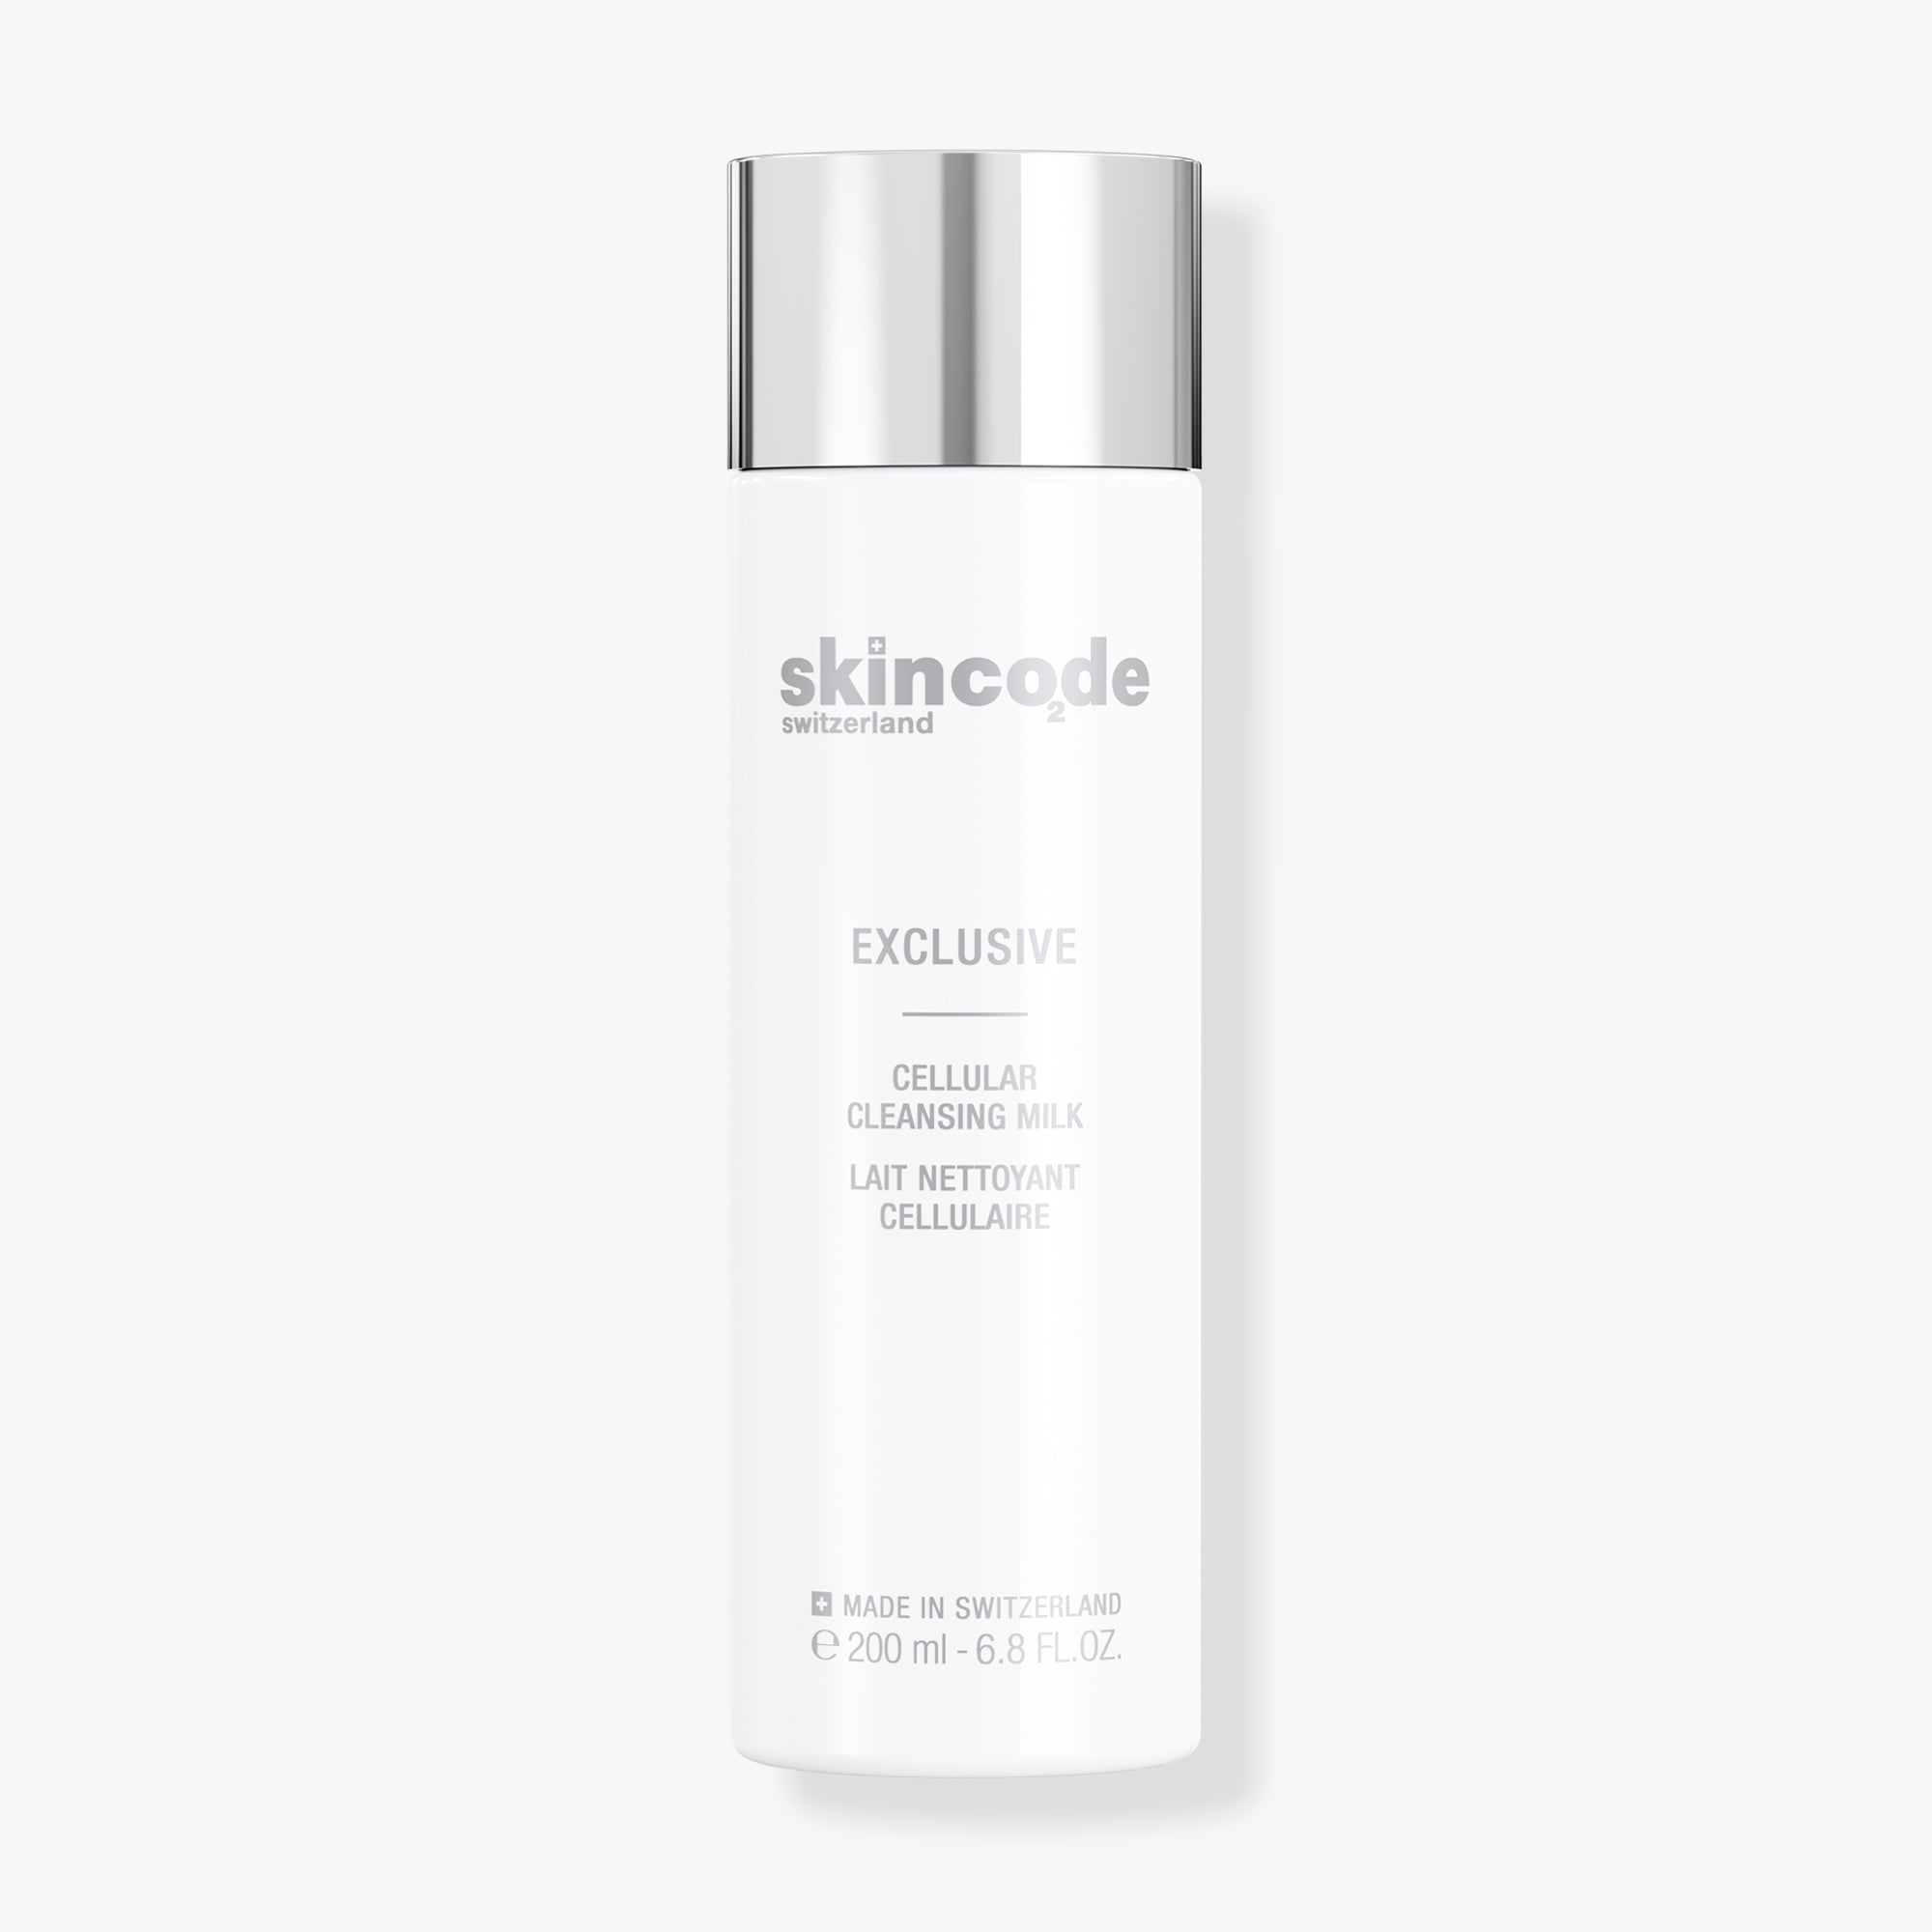 SkinCode Exclusive, Cellular Cleansing Milk